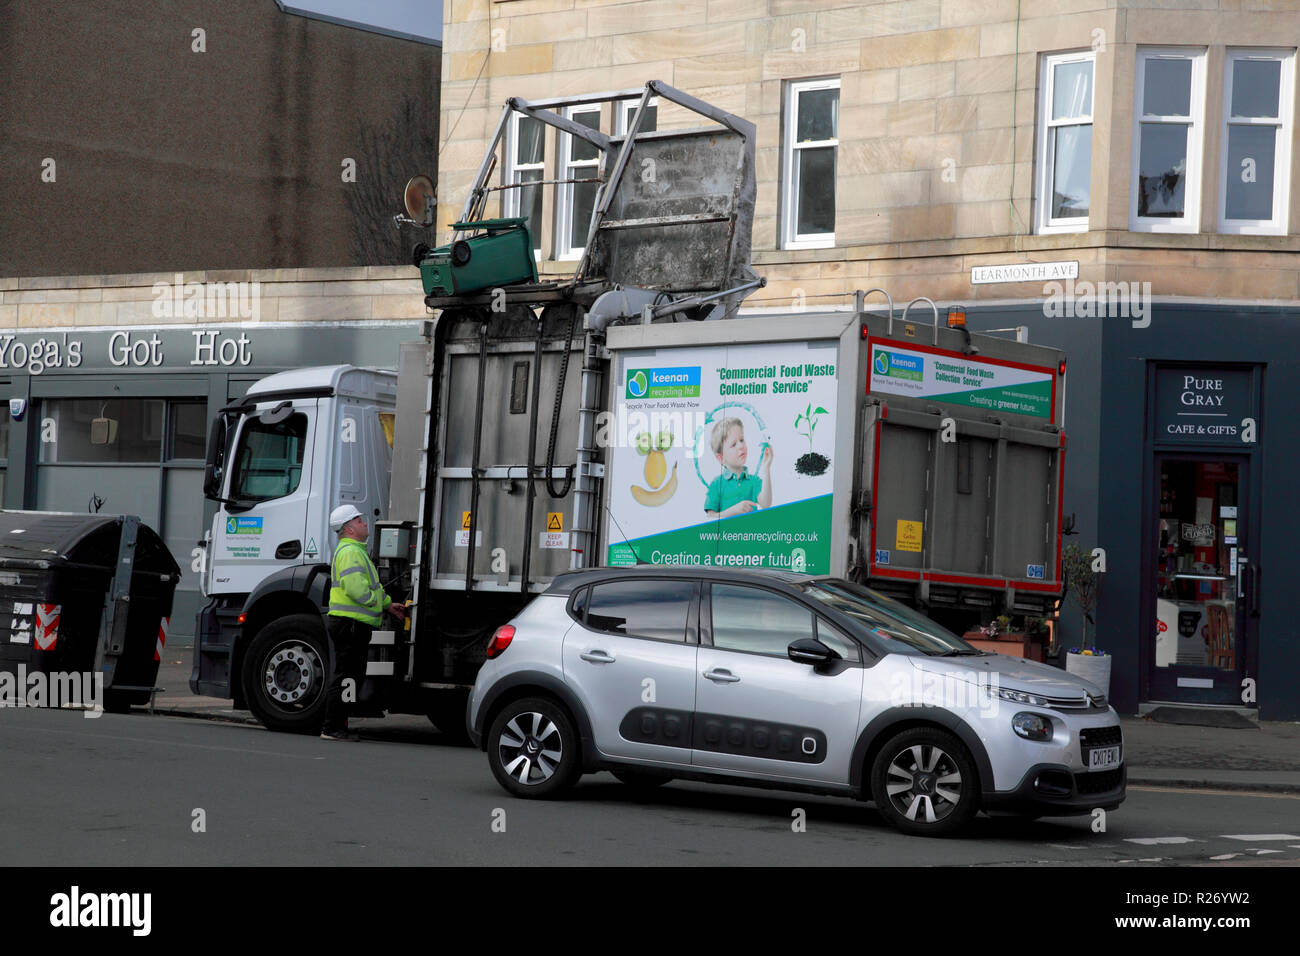 A green bin about to empty its contents into a bin lorry owned by Keenan Commercial Food Waste Collection Service Stock Photo